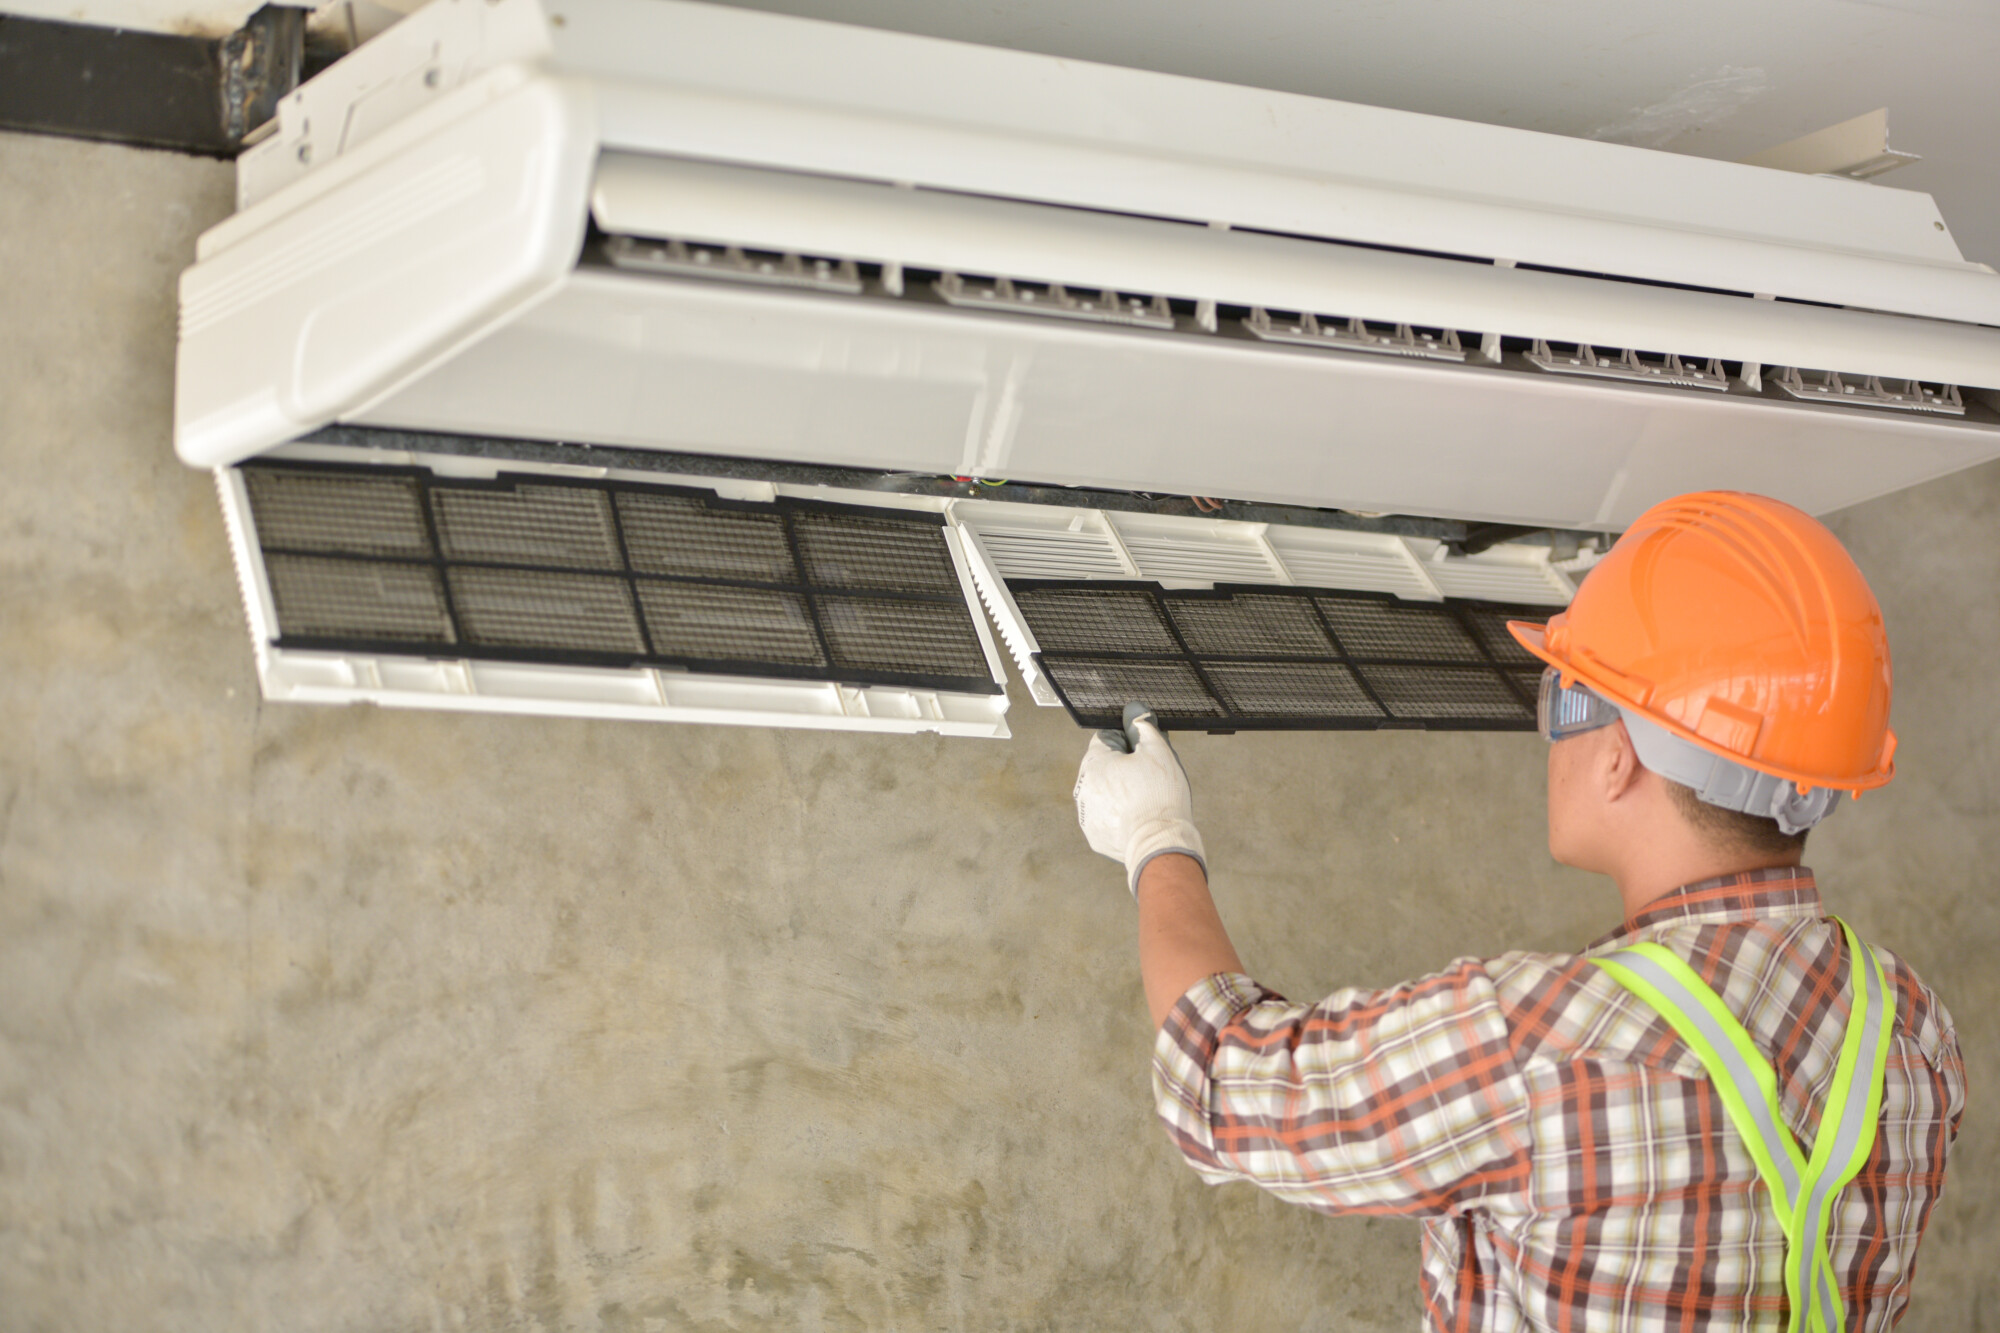 Taking care of your HVAC systems is an important part of your overall home maintenance tasks. Here are some tips for tackling your HVAC preventive maintenance.